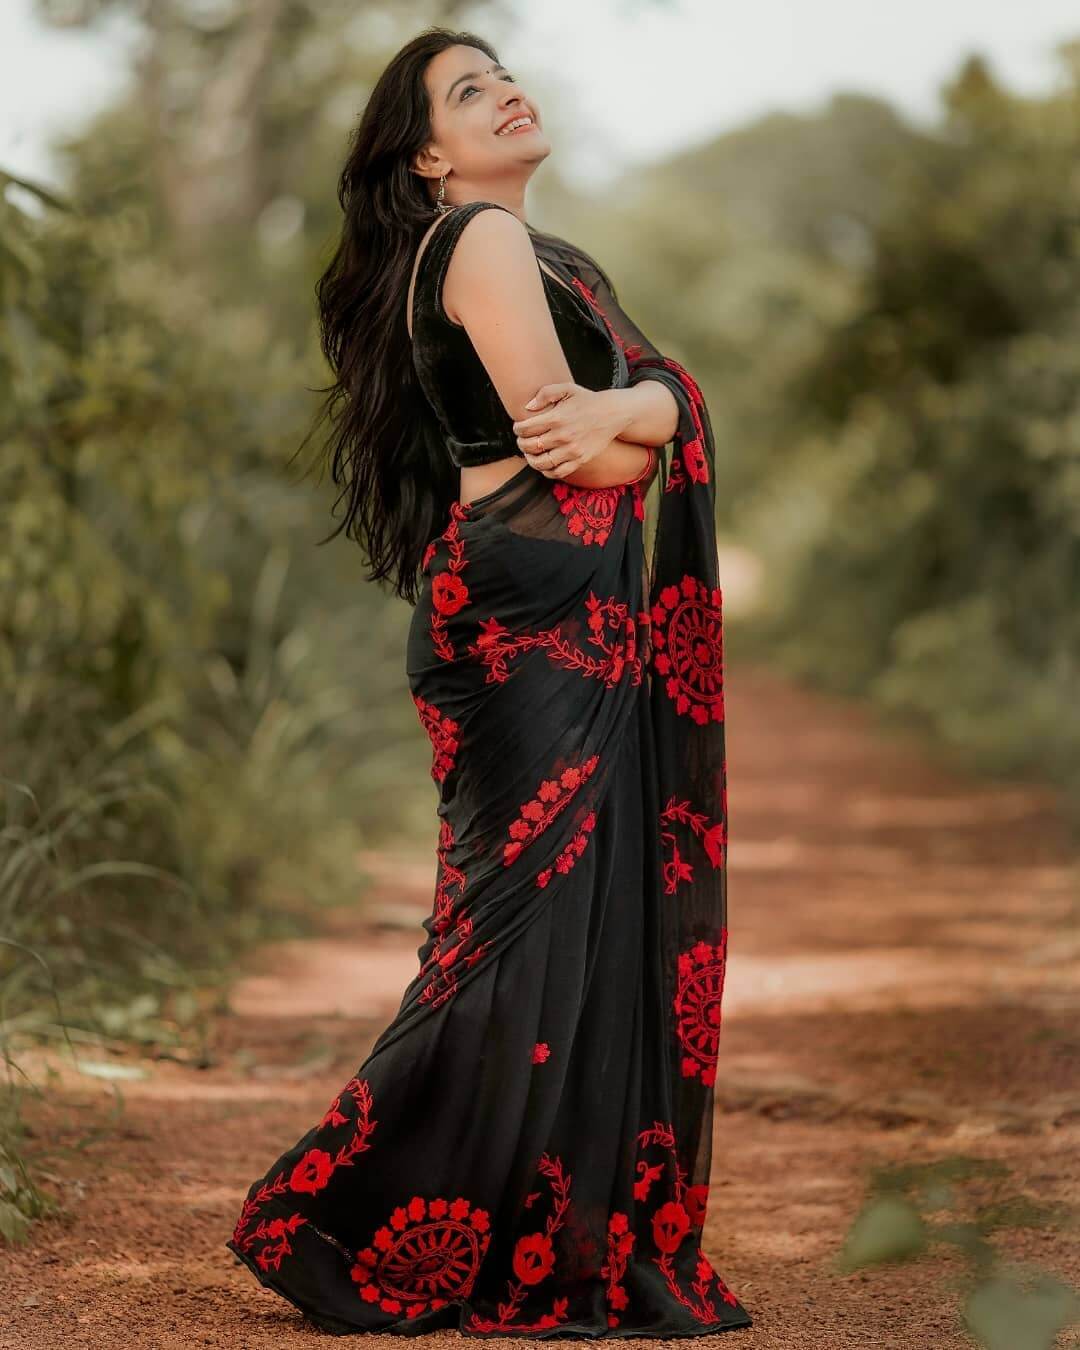 Alphy Panjikaran Look Beautiful In Black & Red Embroidered Saree With Sleeveless Velvet Black Blouse